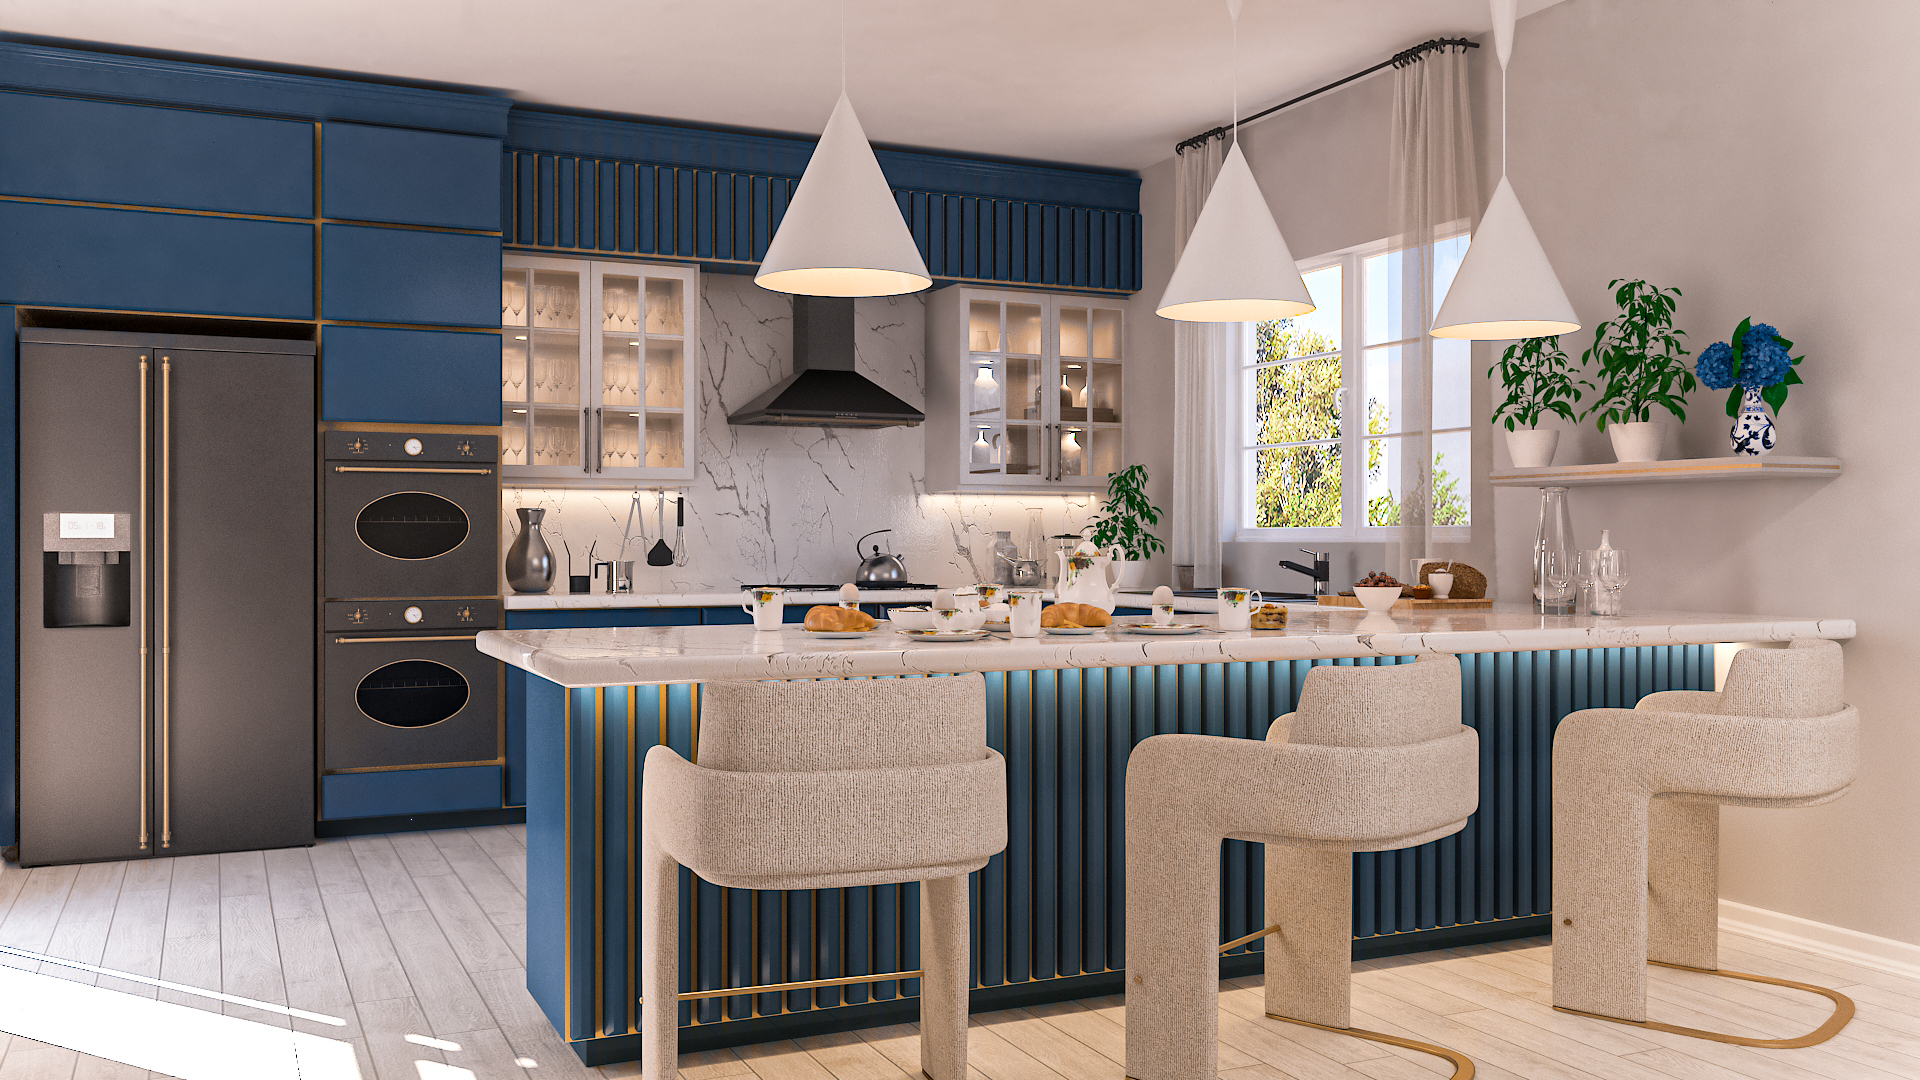 Benjamin Moore's Blue Nova Color of the Year in a kitchen by Homilo